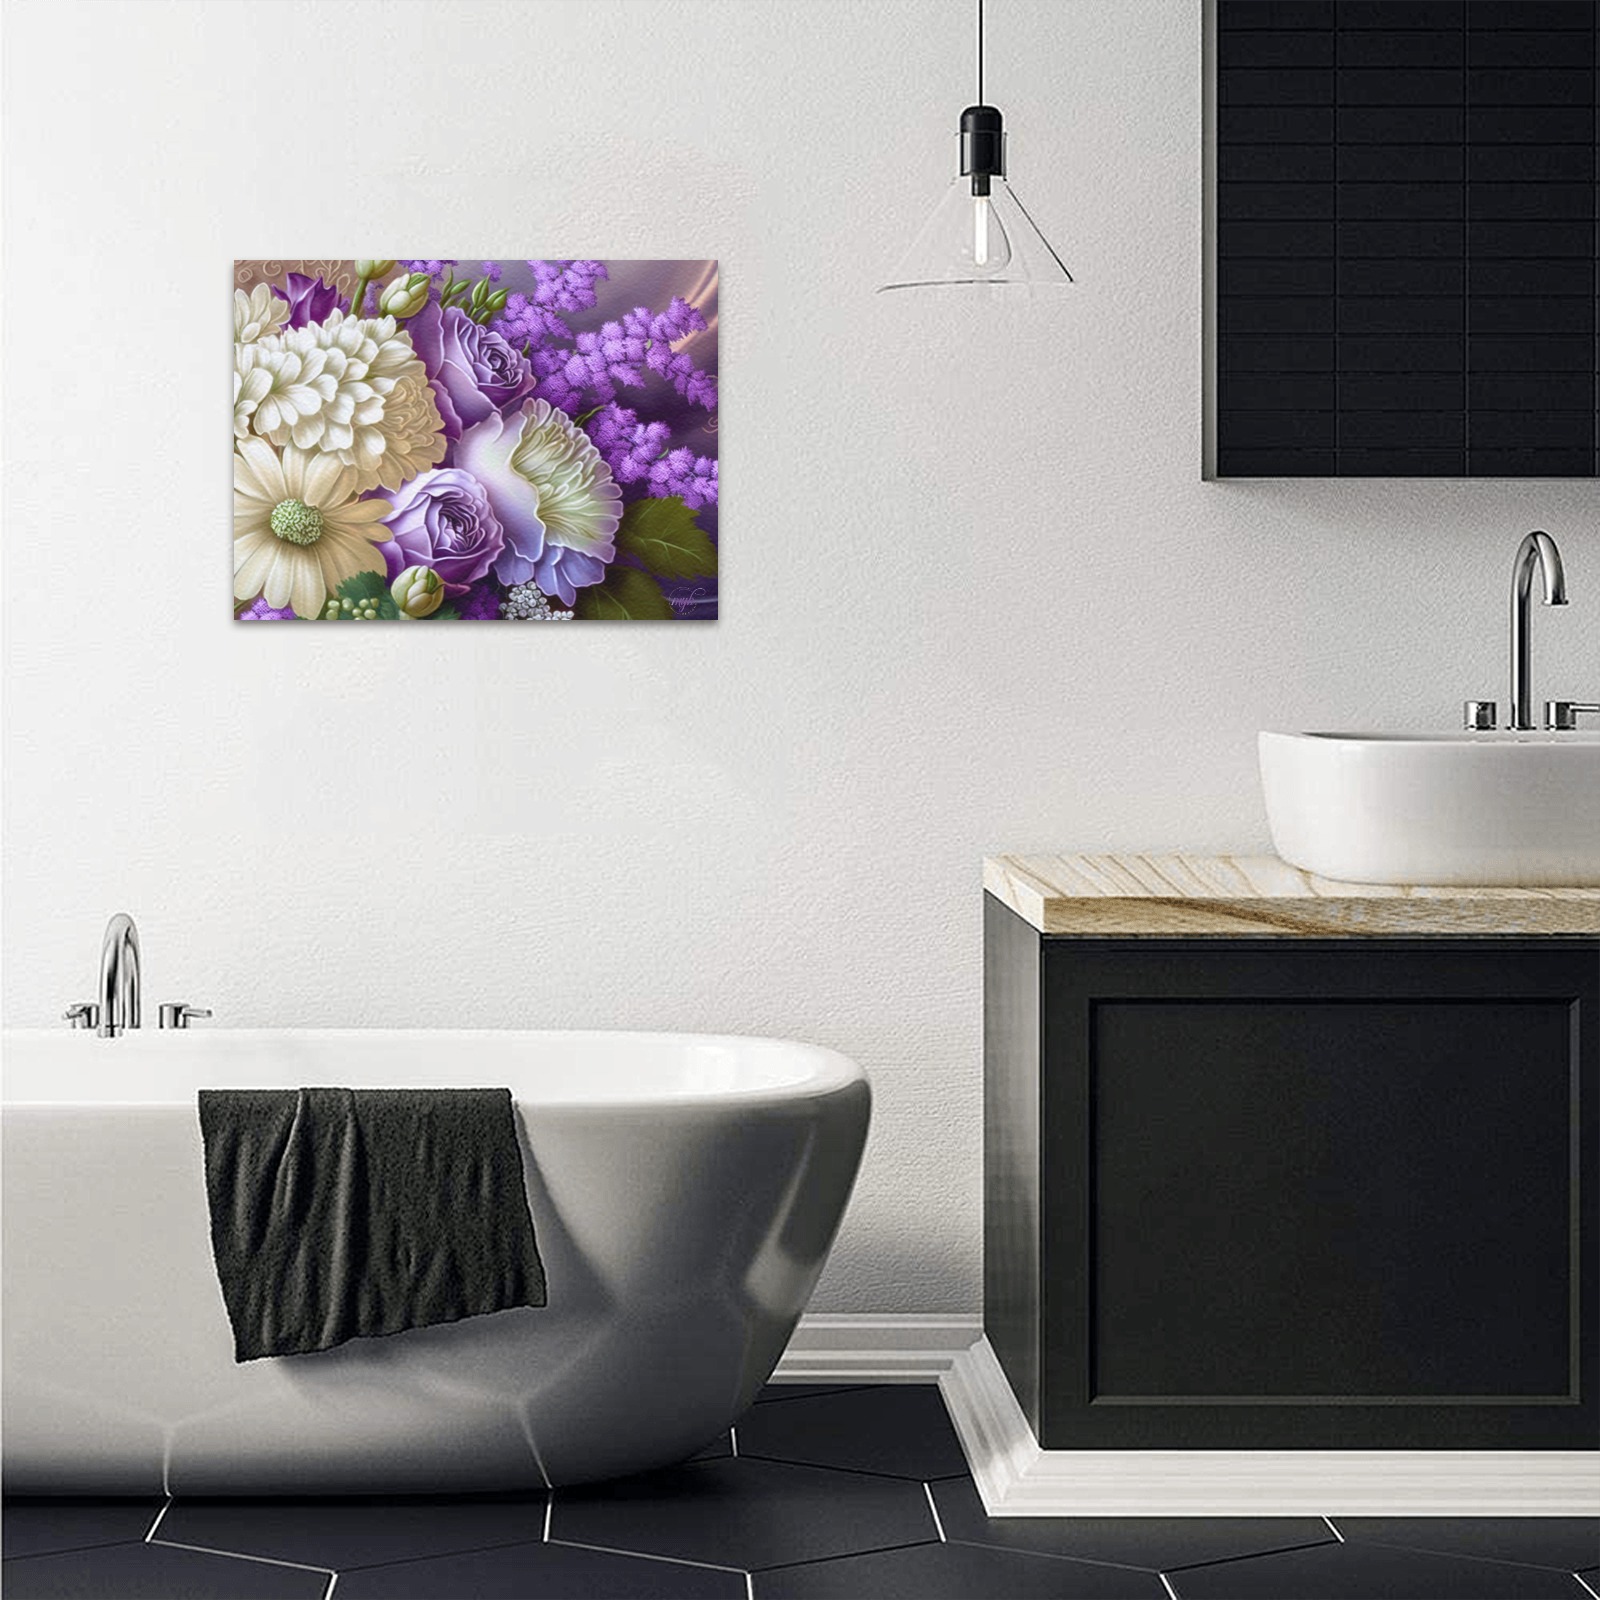 April Showers bring May Flowers Upgraded Canvas Print 16"x12"